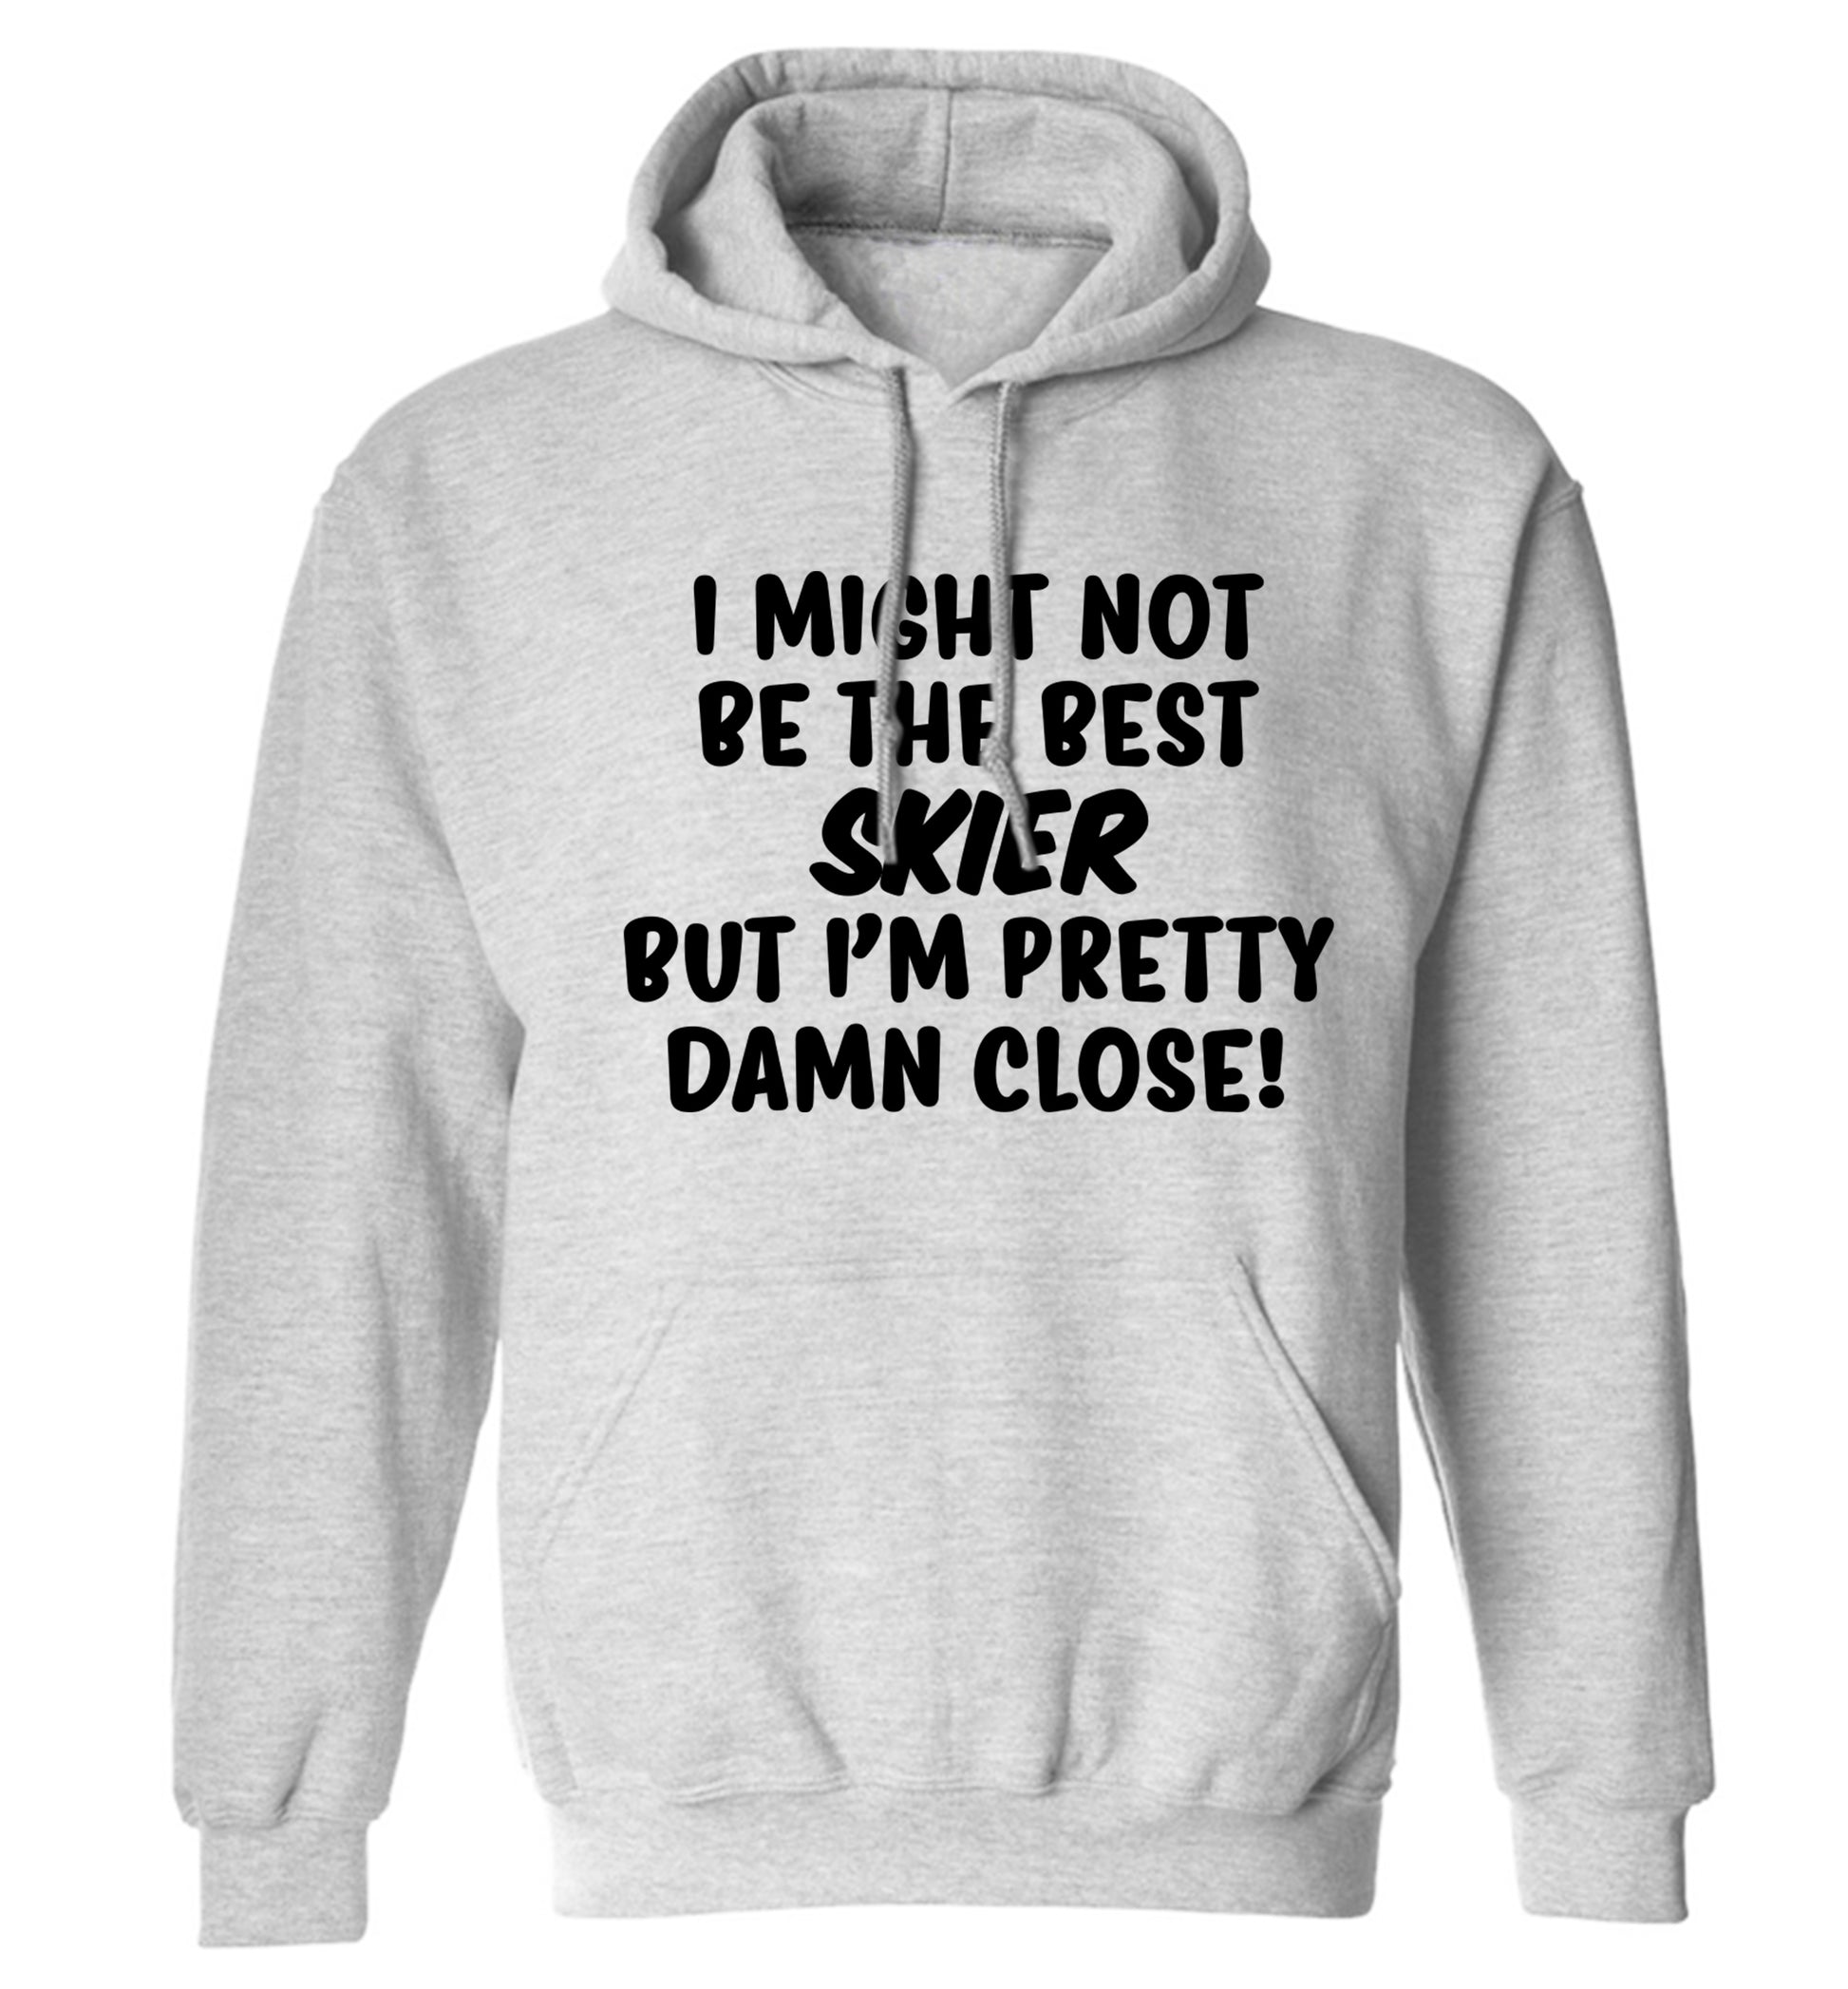 I might not be the best skier but I'm pretty damn close! adults unisexgrey hoodie 2XL